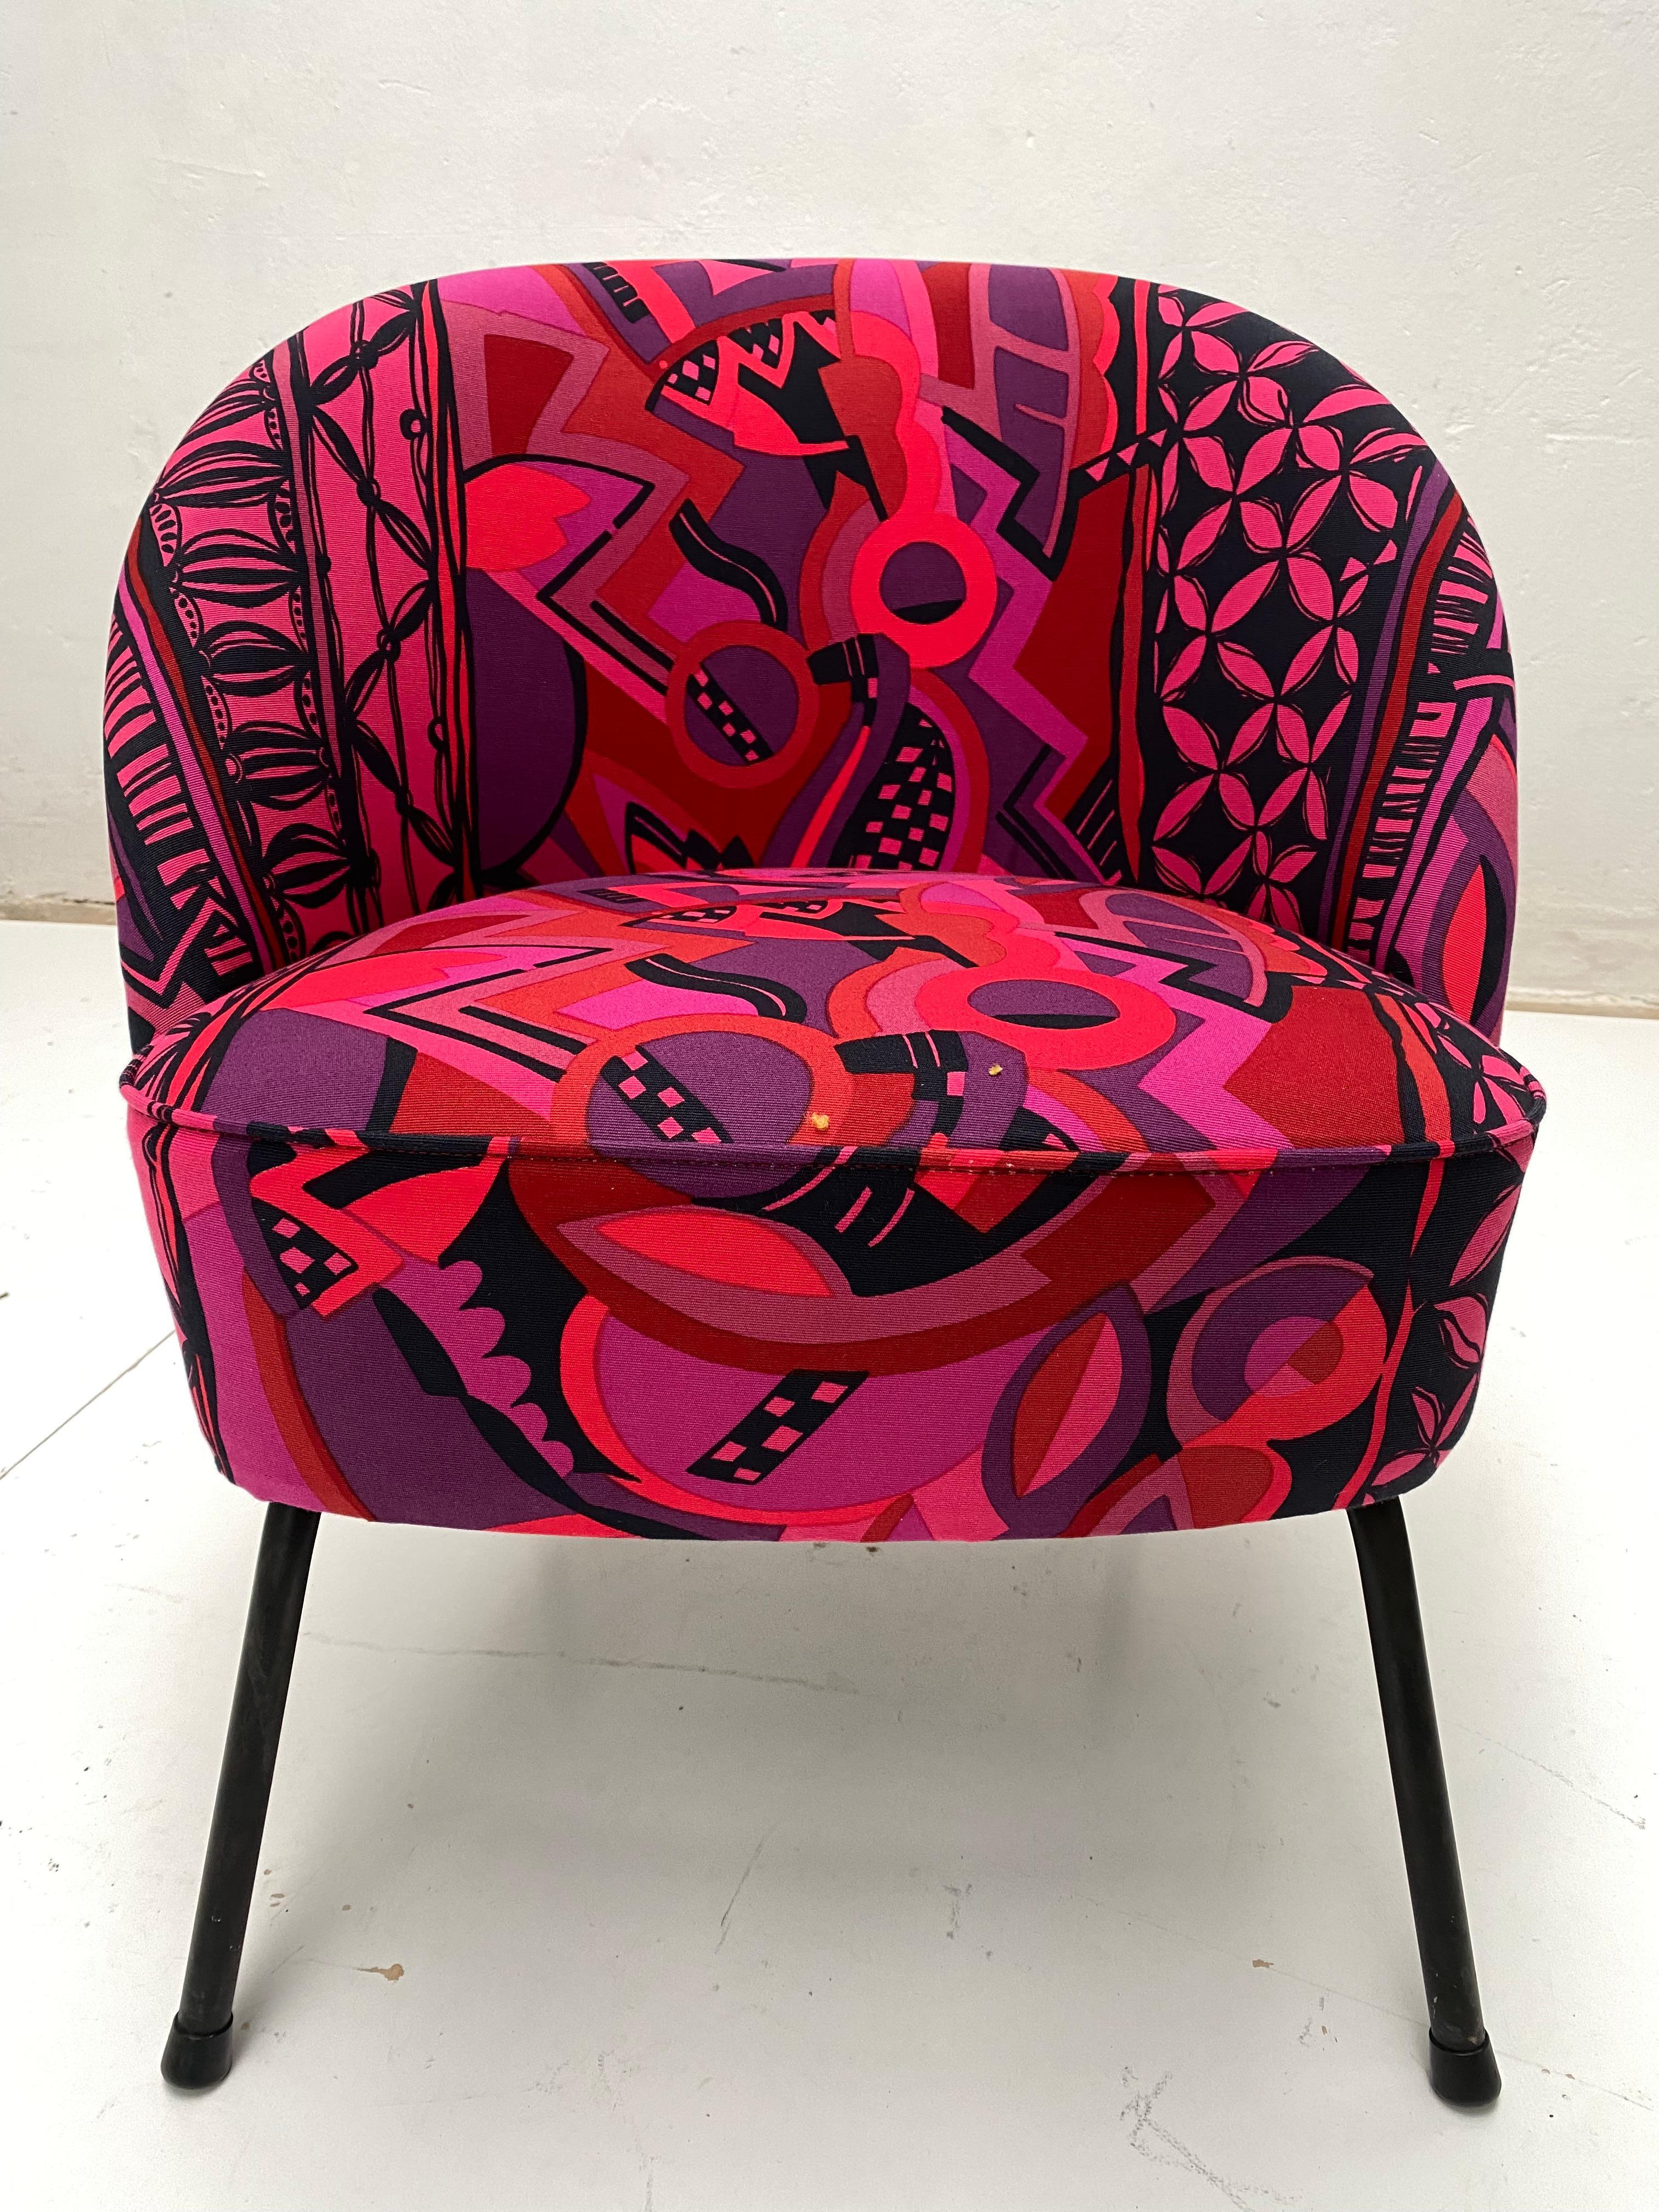 Bespoke Gianni Versace Fabric Custom Upholstered Pair of 1950's Cocktail Chairs For Sale 7